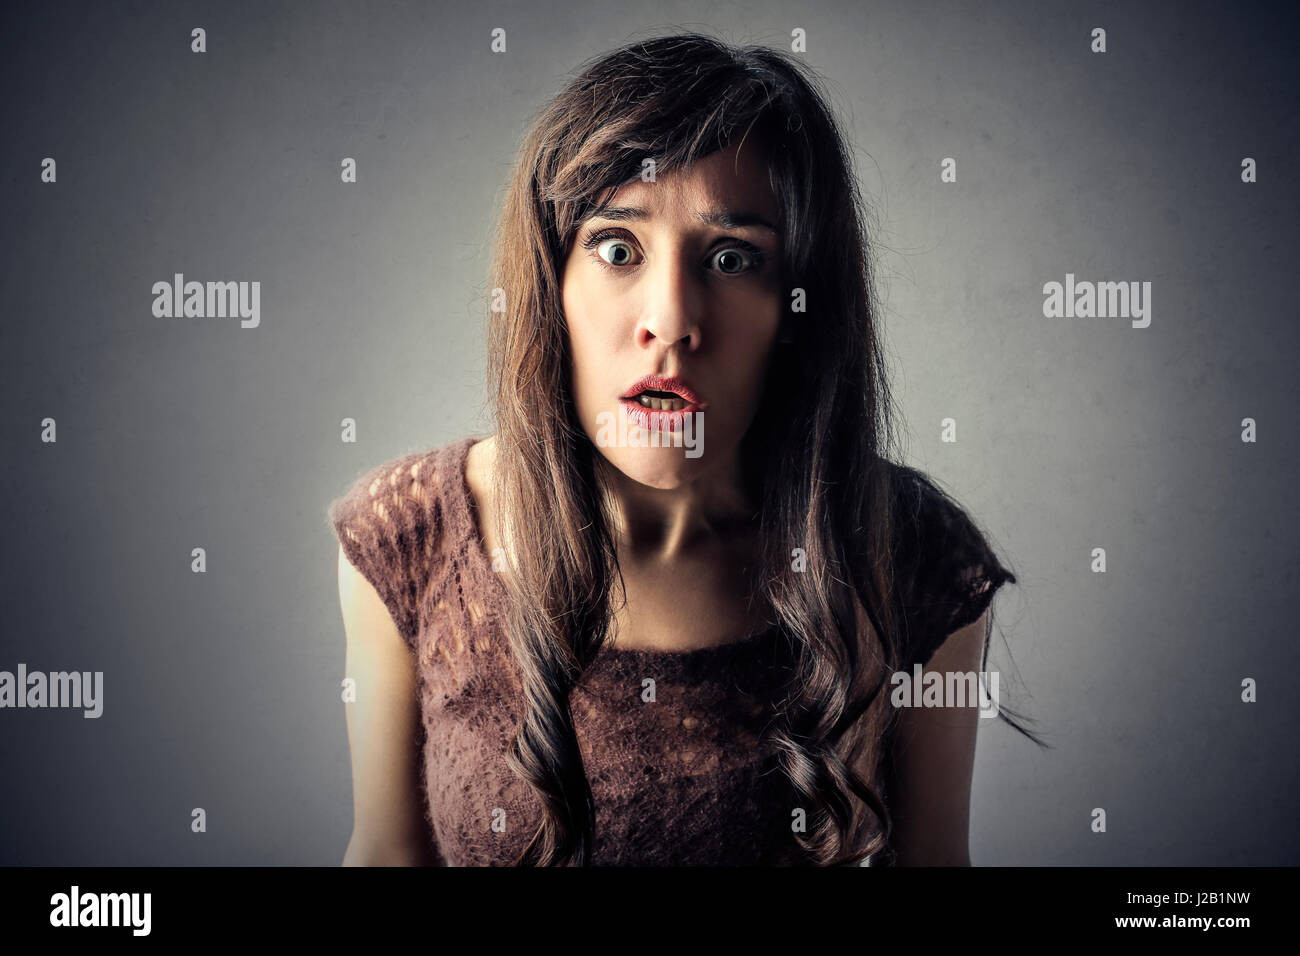 Scared woman looking into camera Stock Photo